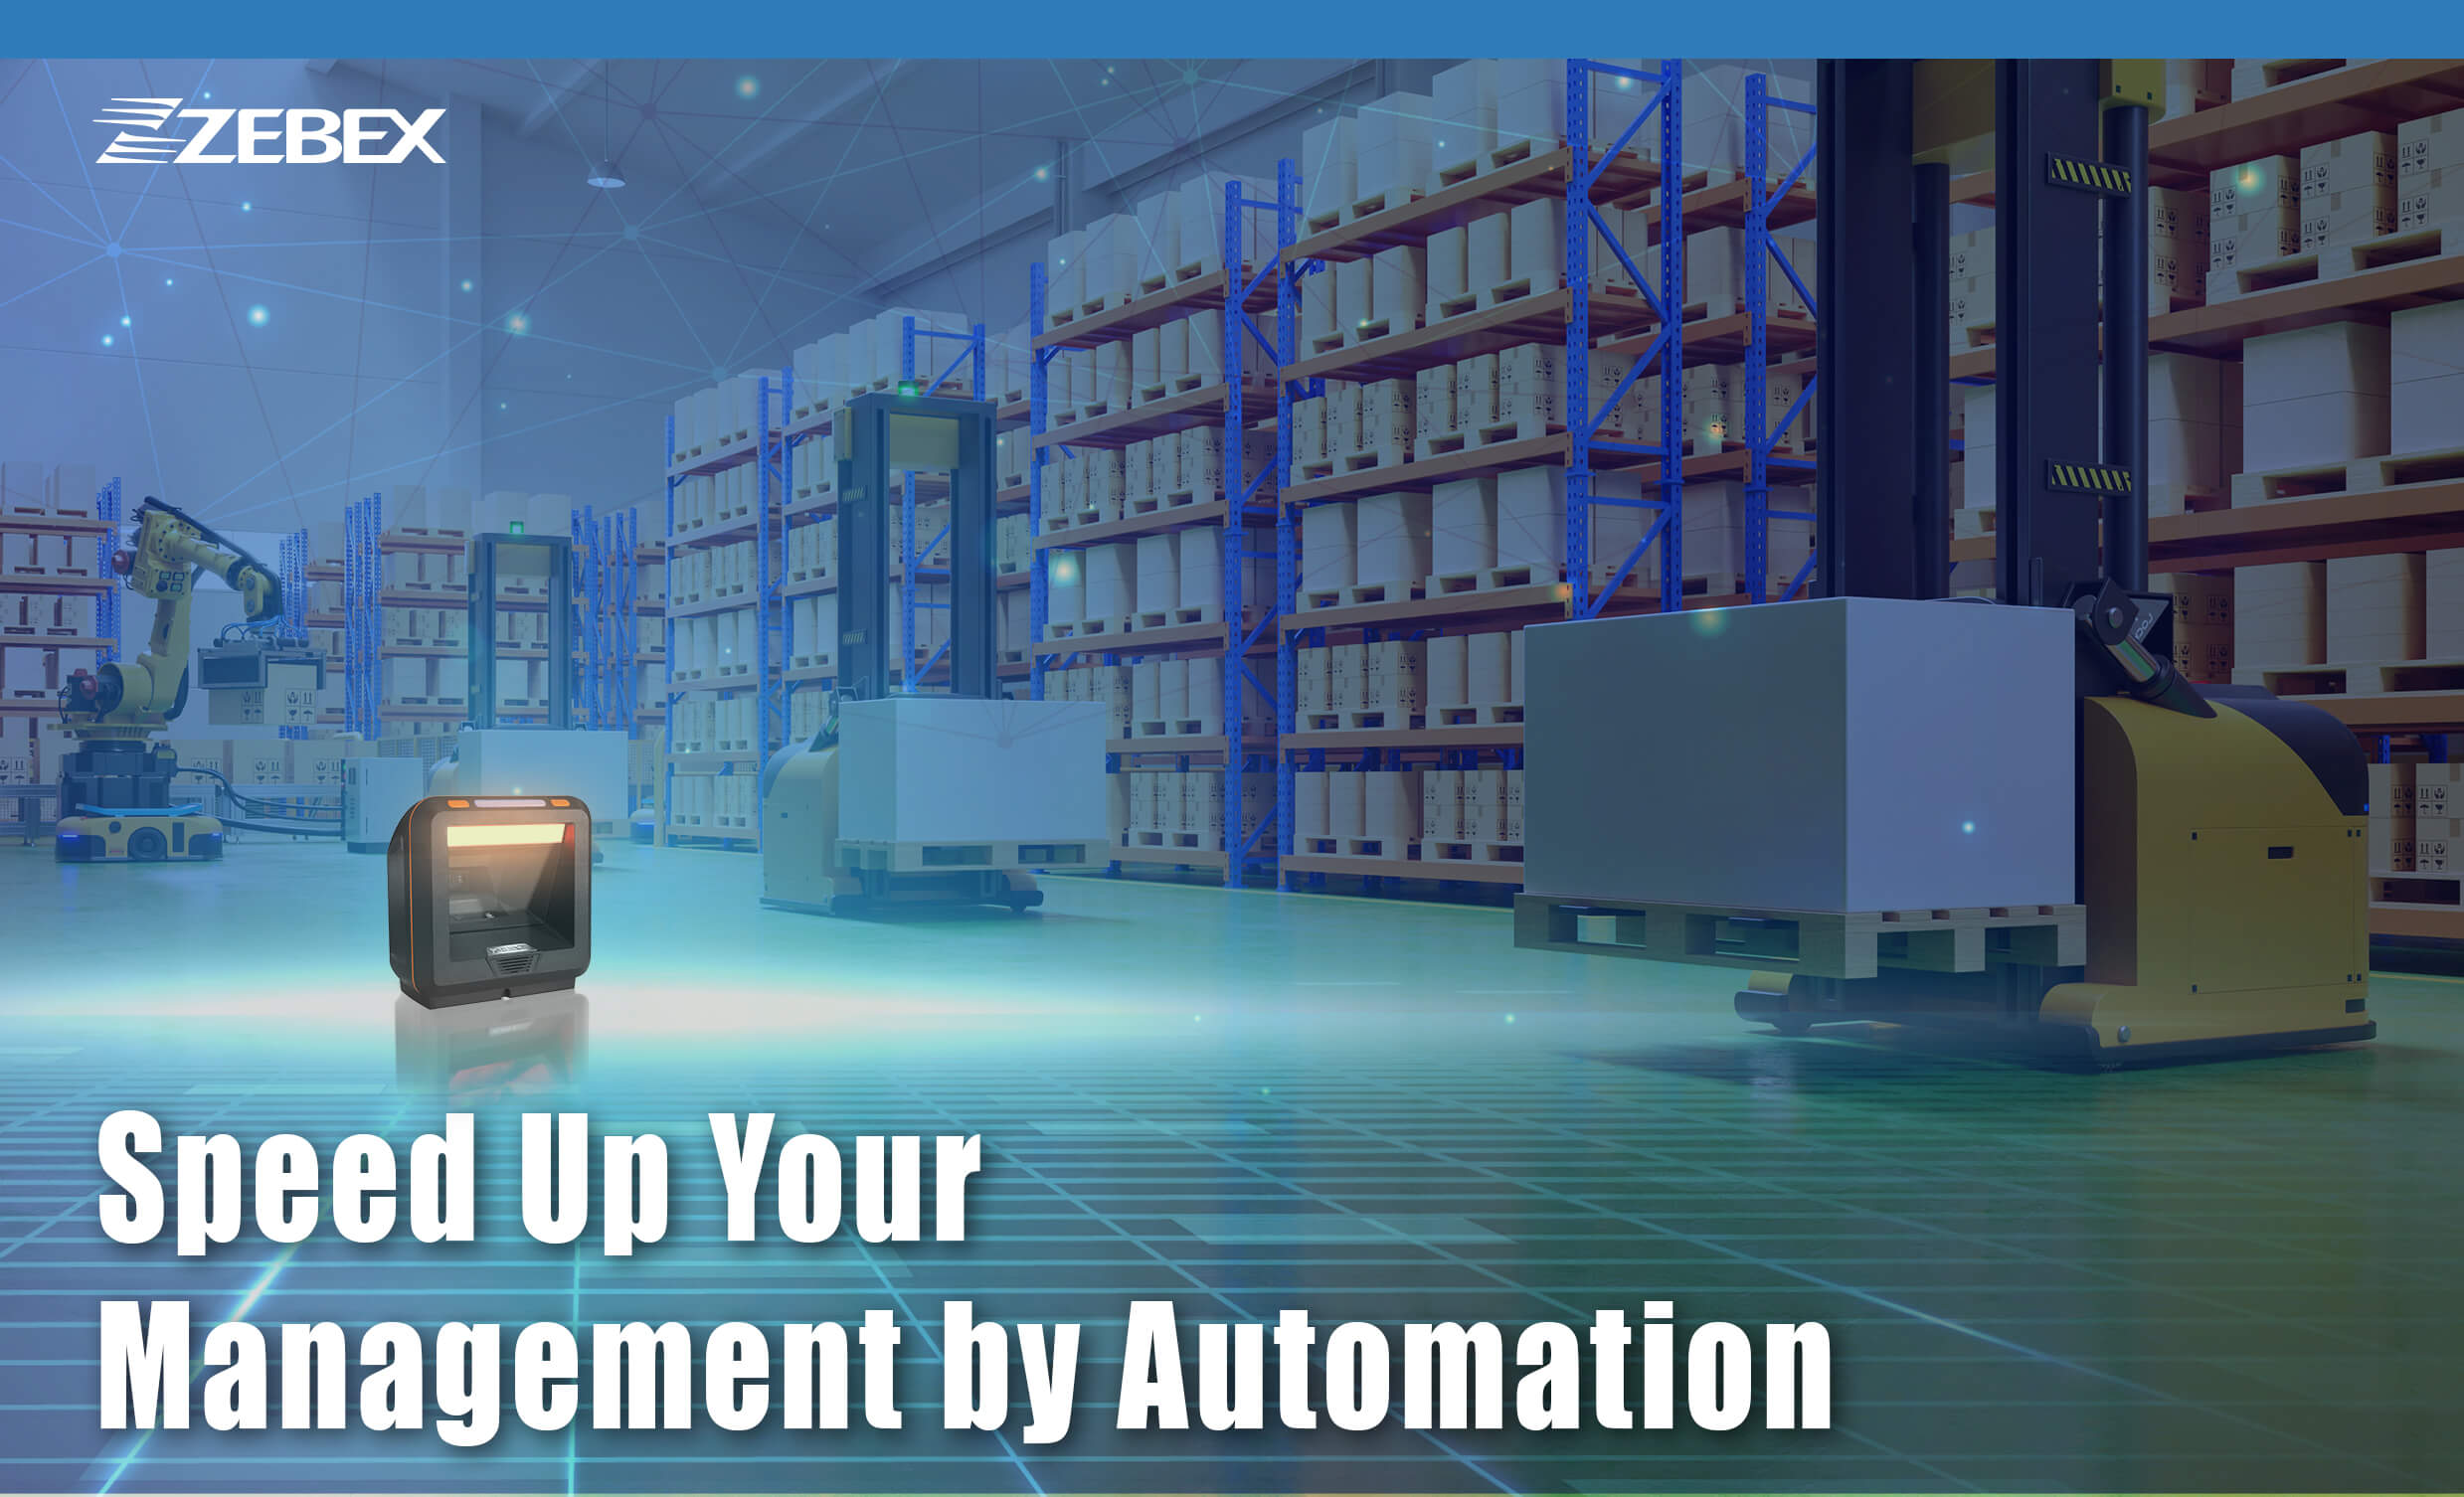 ZEBEX,Speed_Up_Your_Management_by_Automation